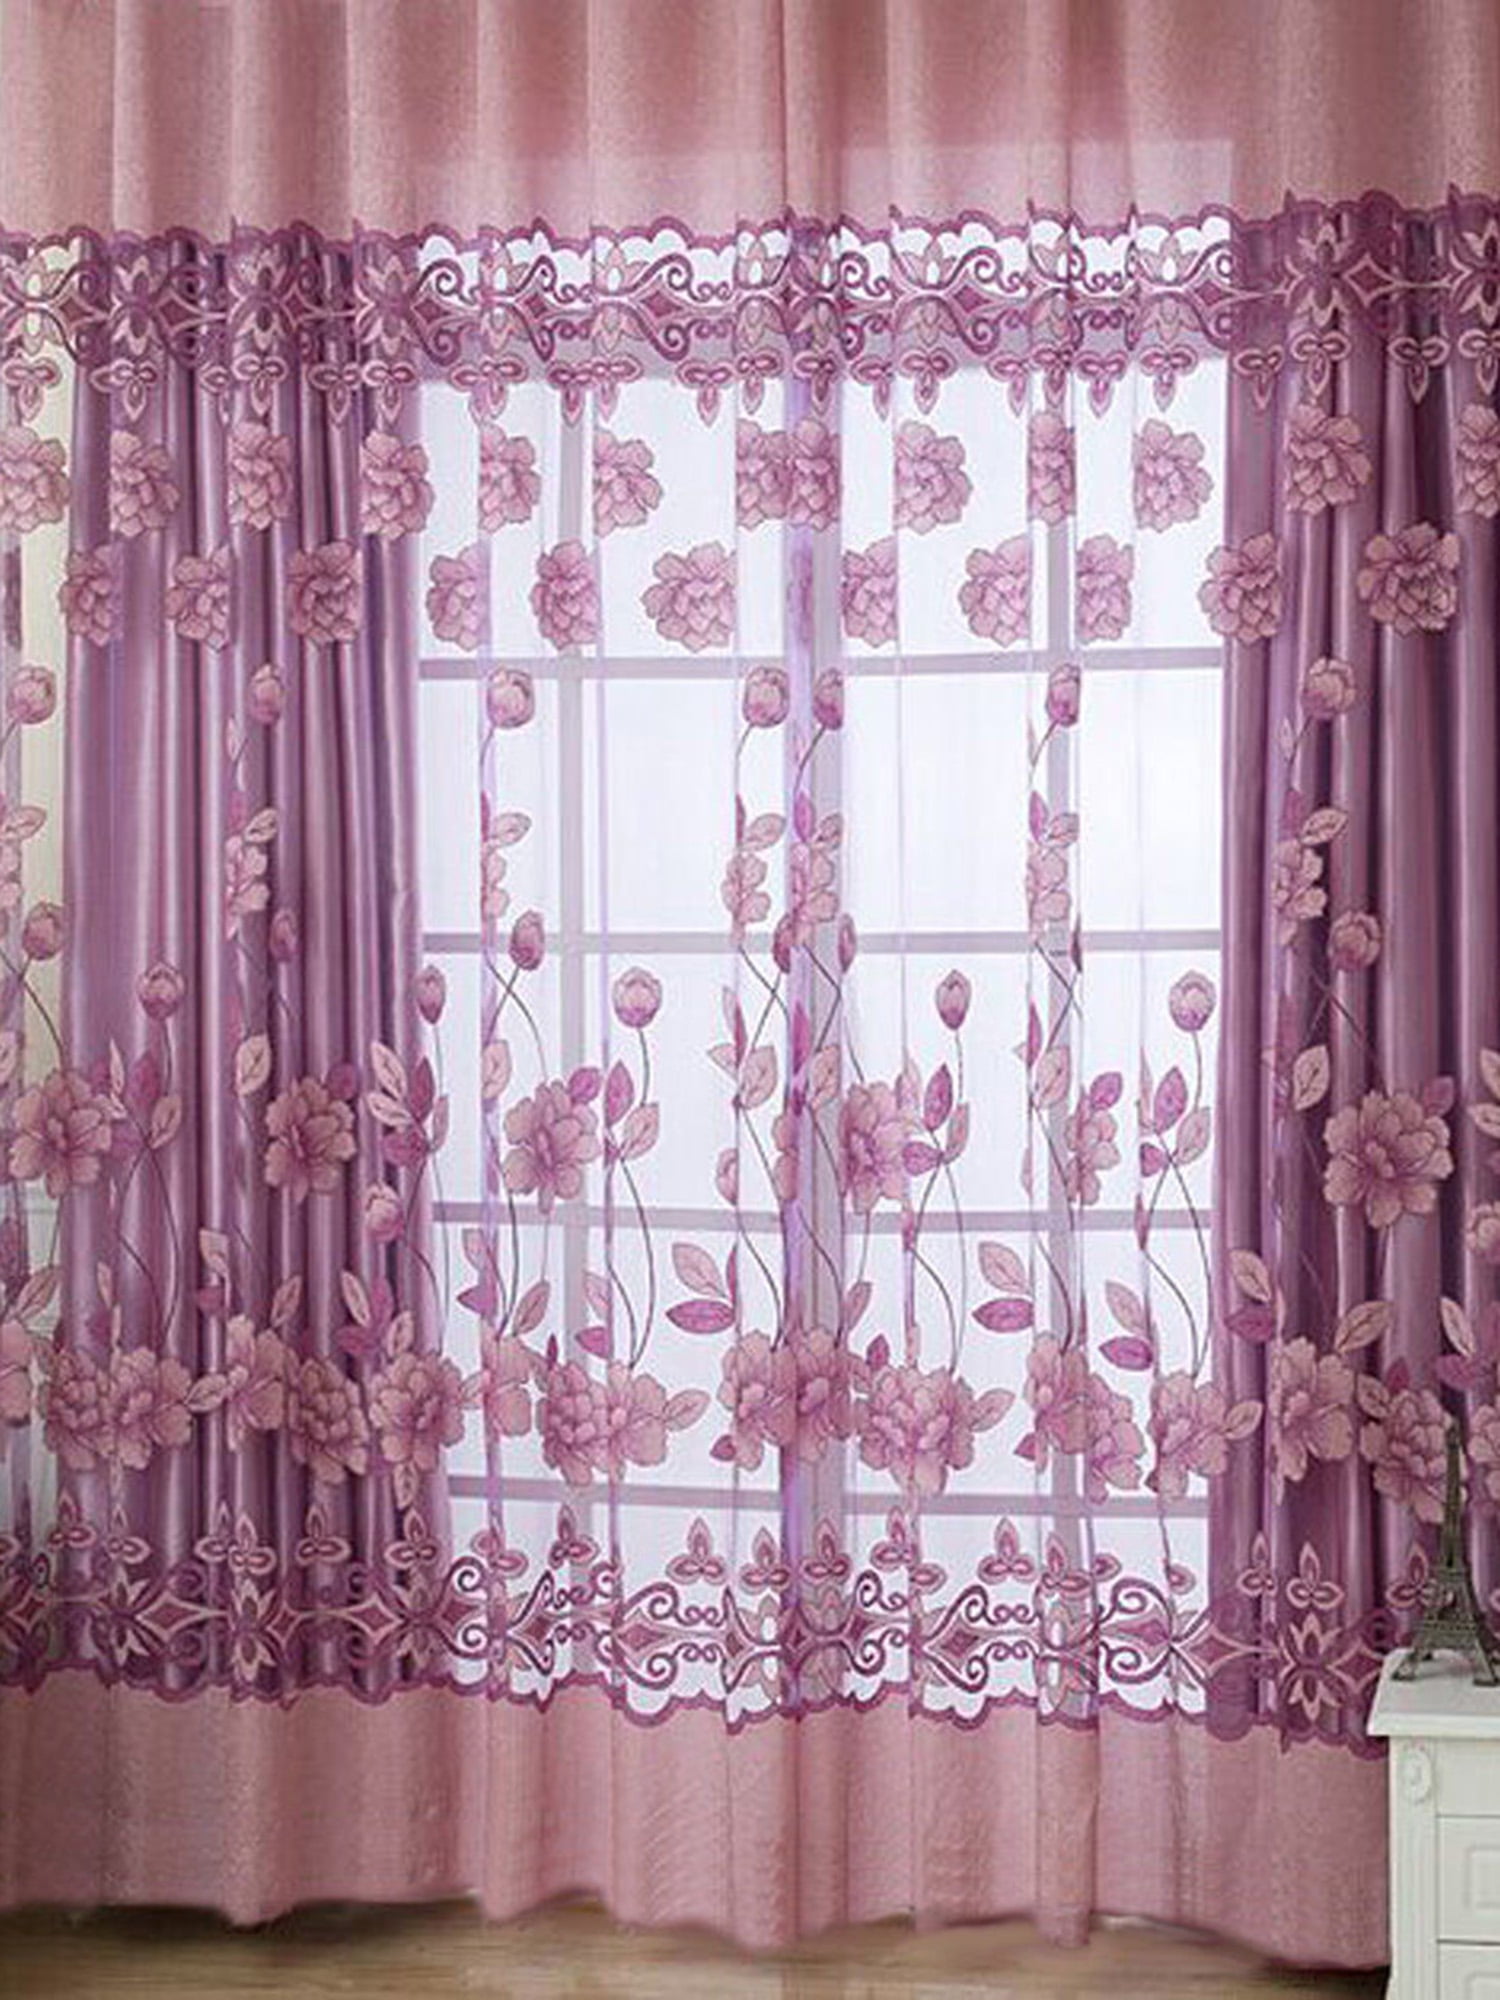 Floral Tulle Voile Door Window Curtain Balcony Drape Panel Sheer Scarf Valances 